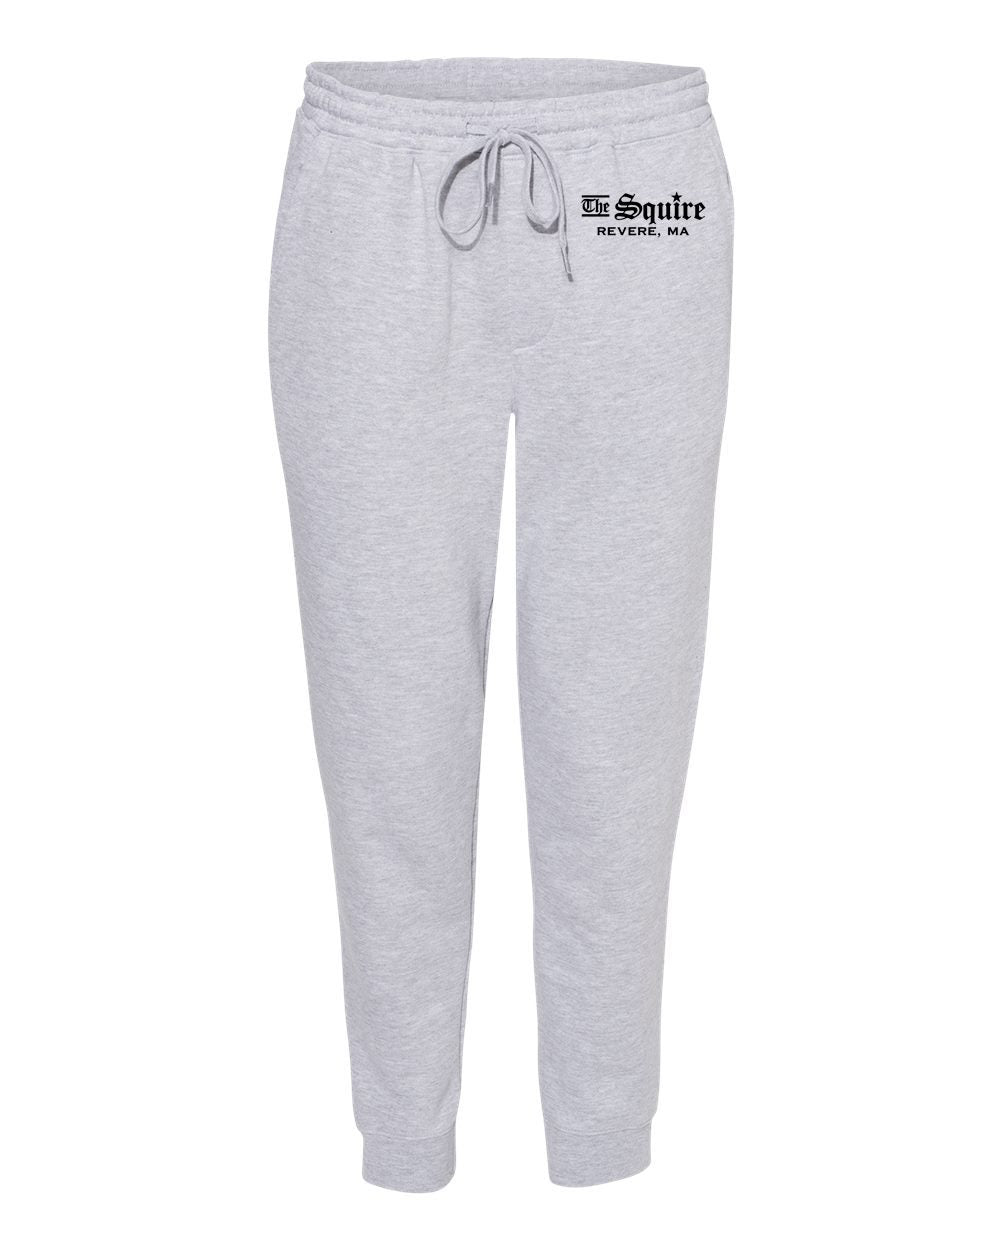 The Squire Men's Midweight Joggers